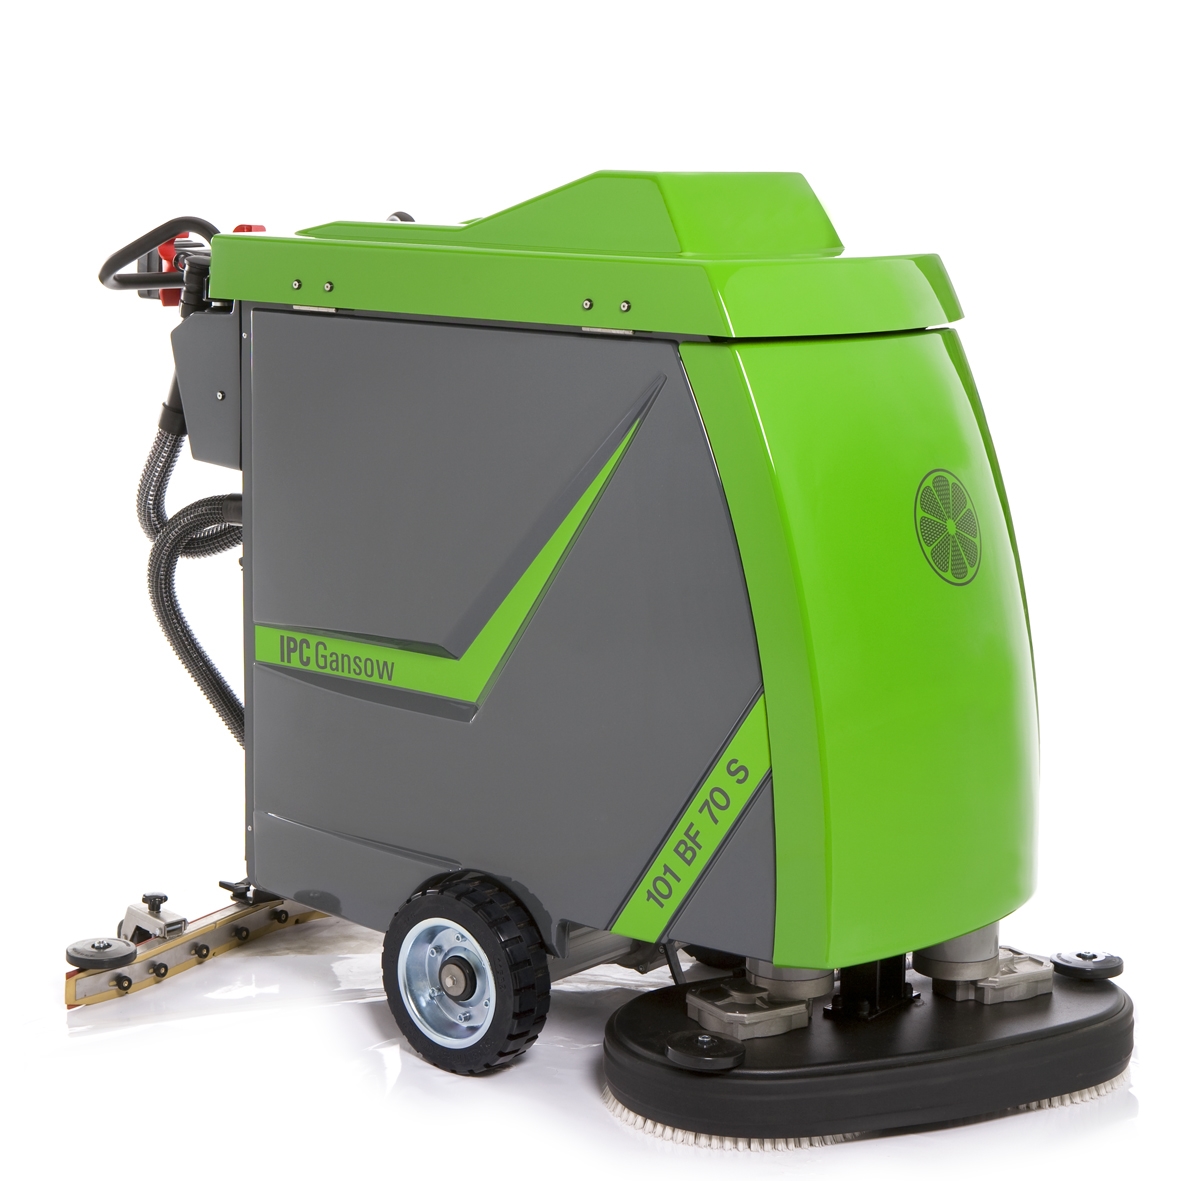 Alpha FME Introducing the IPC Gansow Premium 101 BF 85 Scrubber Drier